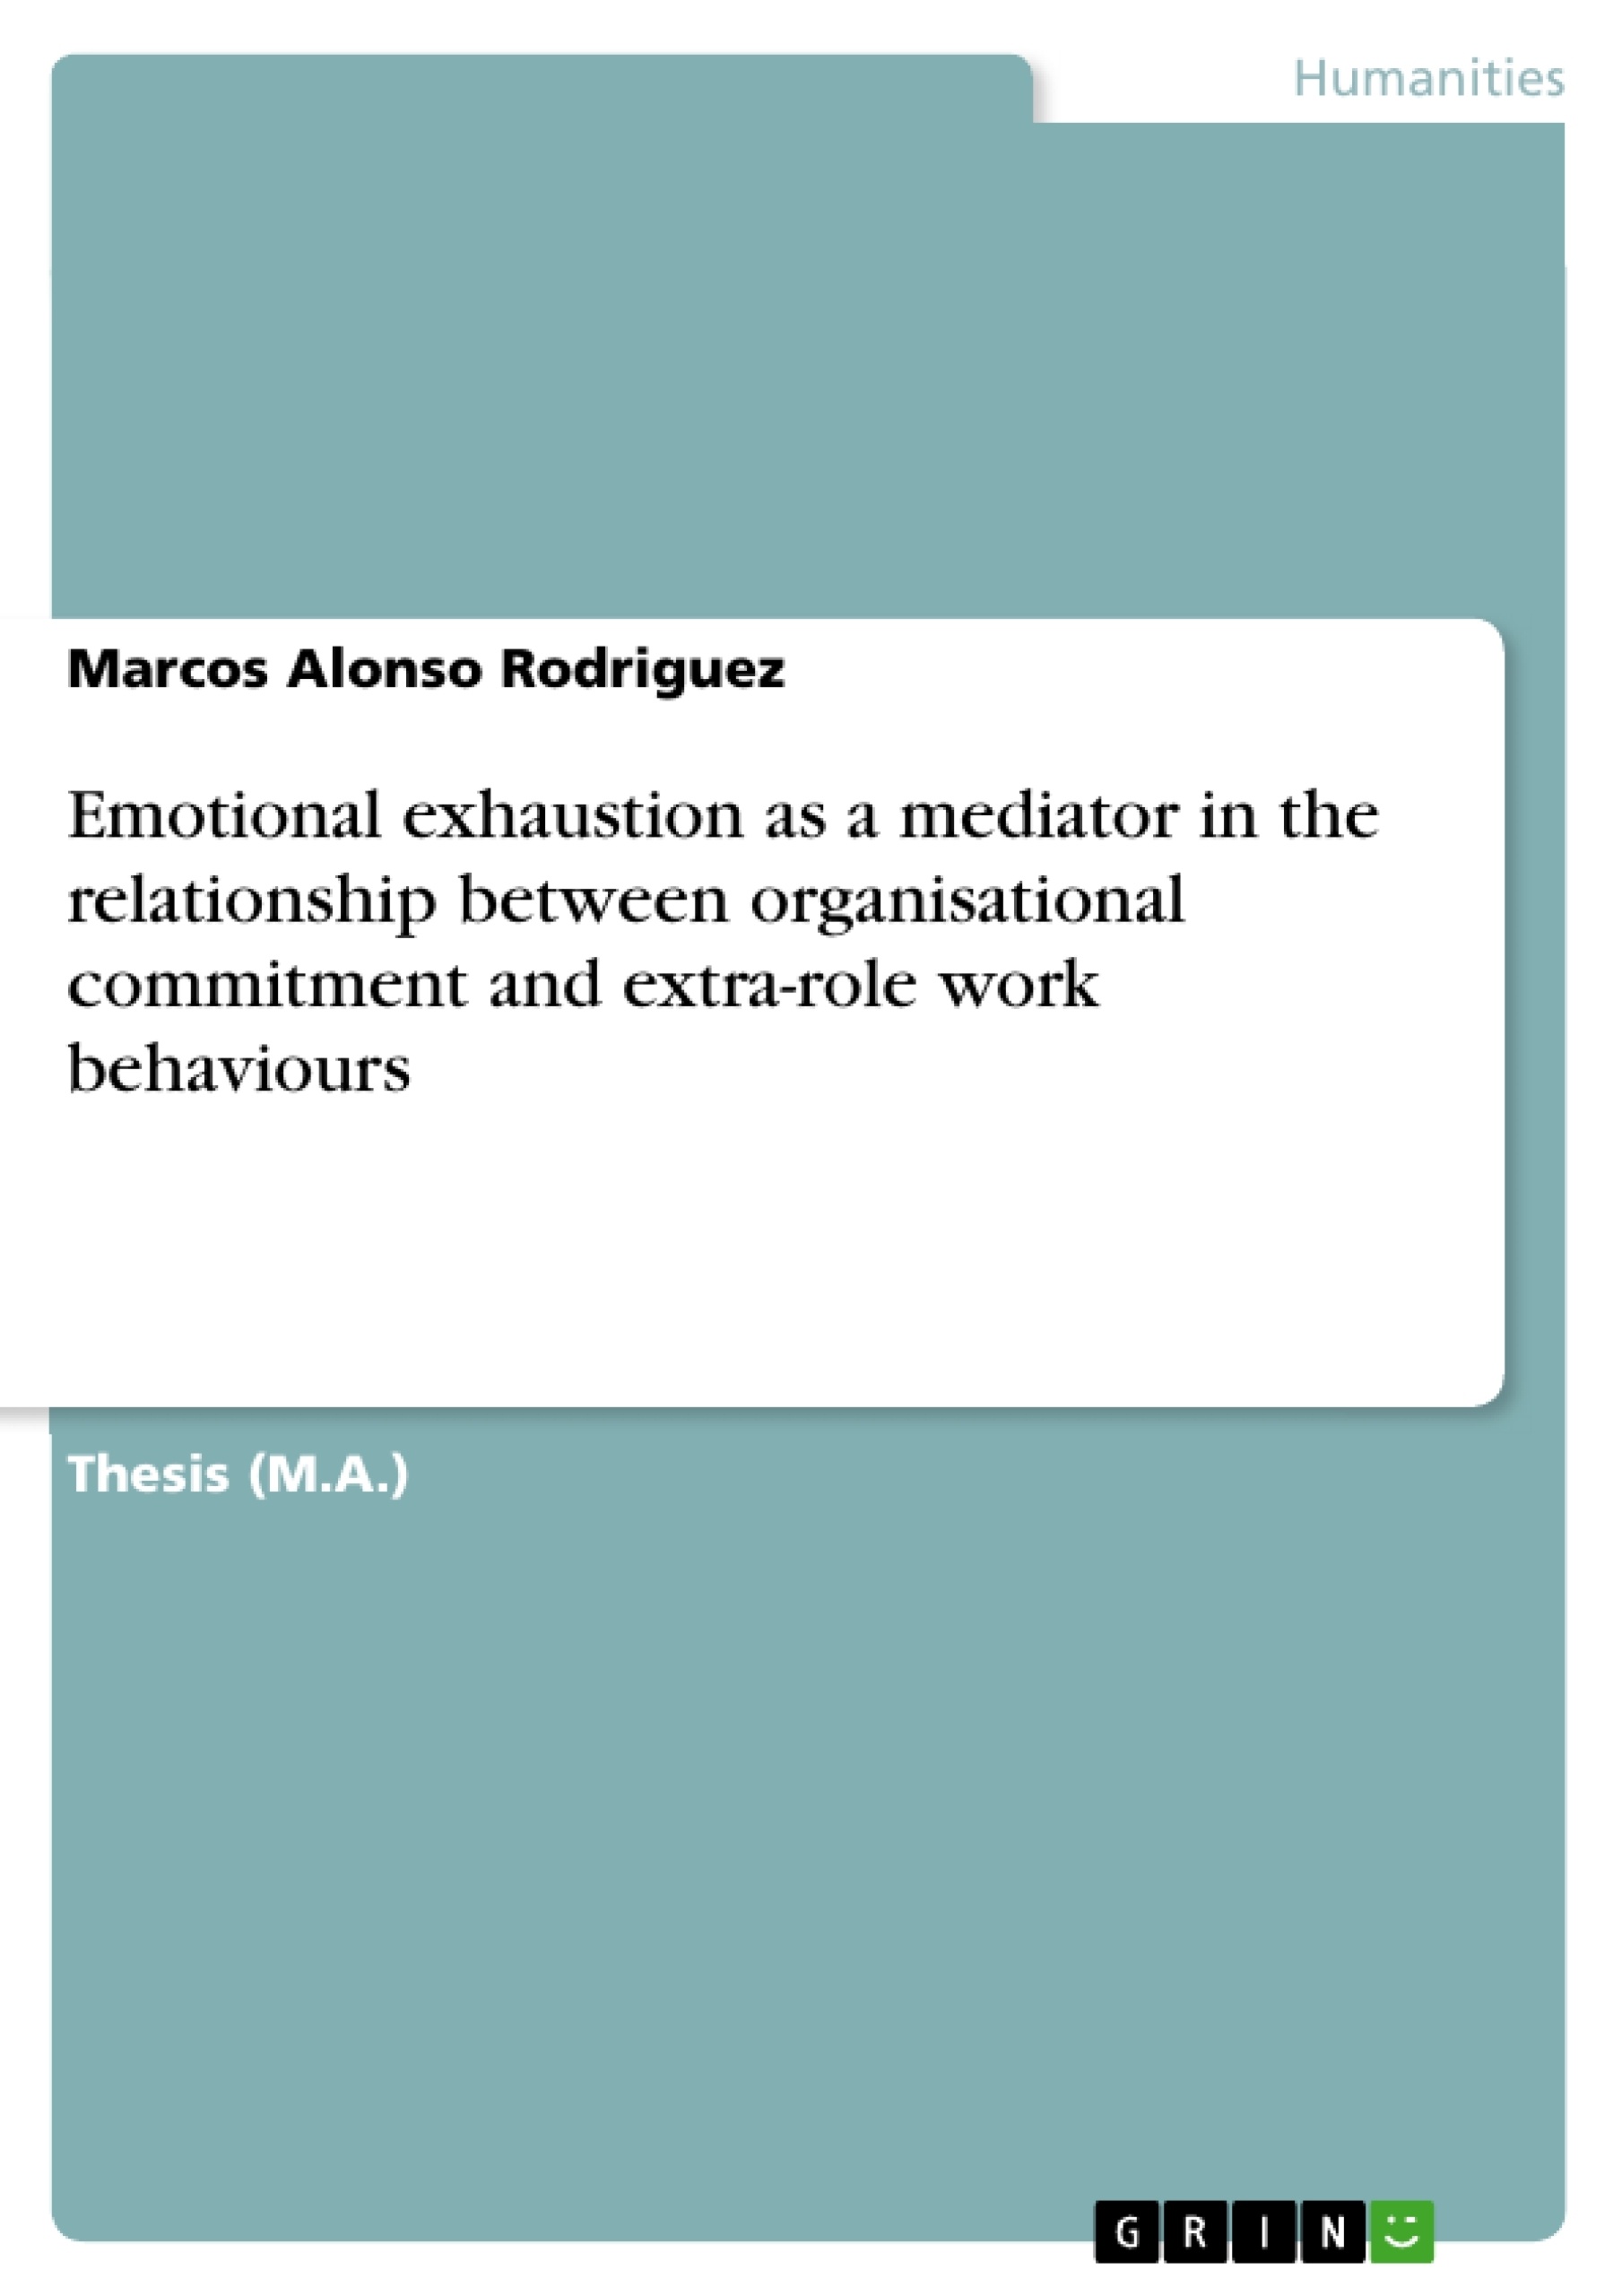 Titre: Emotional exhaustion as a mediator in the relationship between organisational commitment and extra-role work behaviours